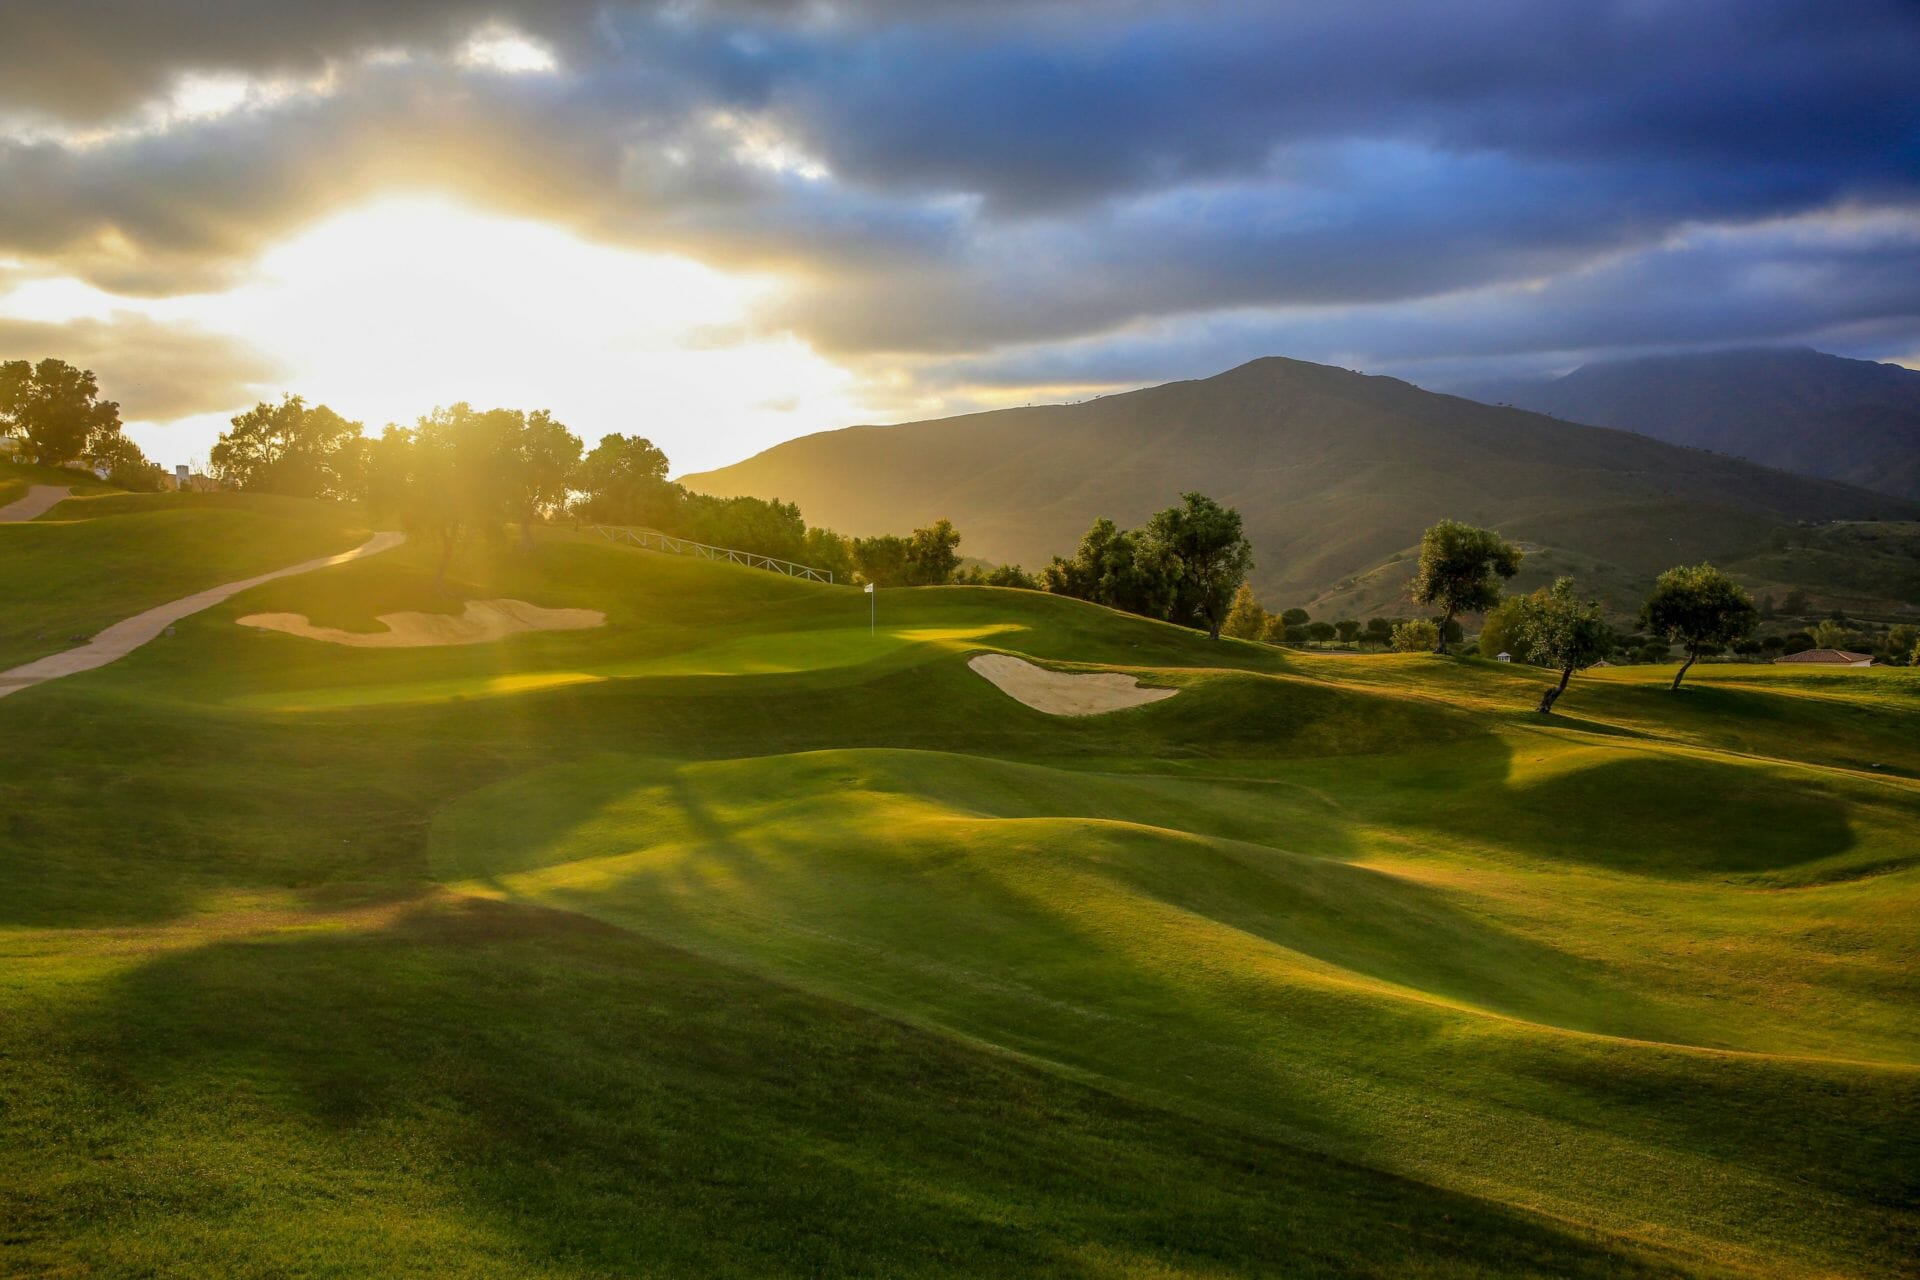 La Cala launch two timely winter packages for frozen Irish golfers